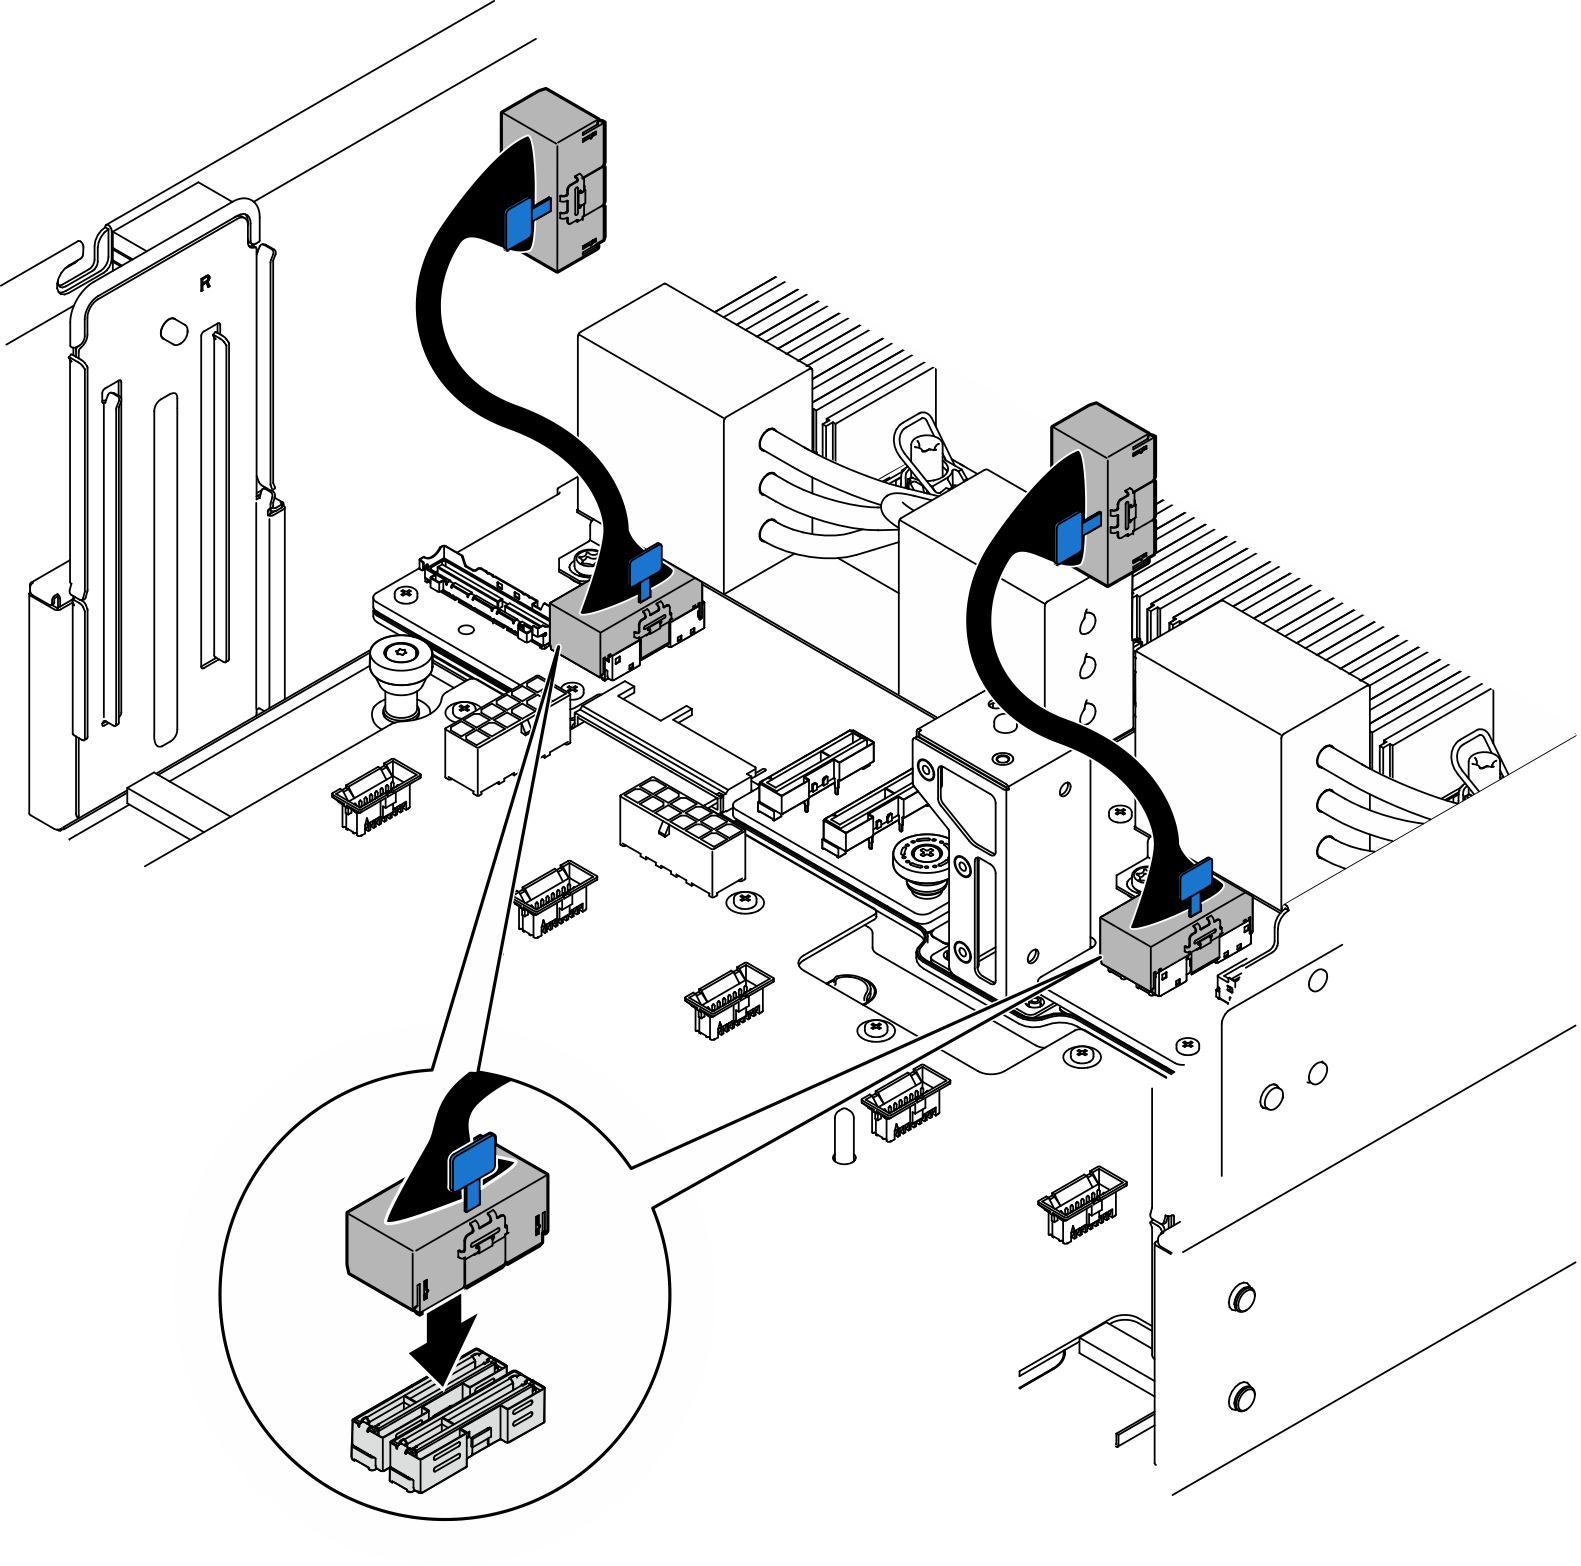 Connecting internal UPI cables